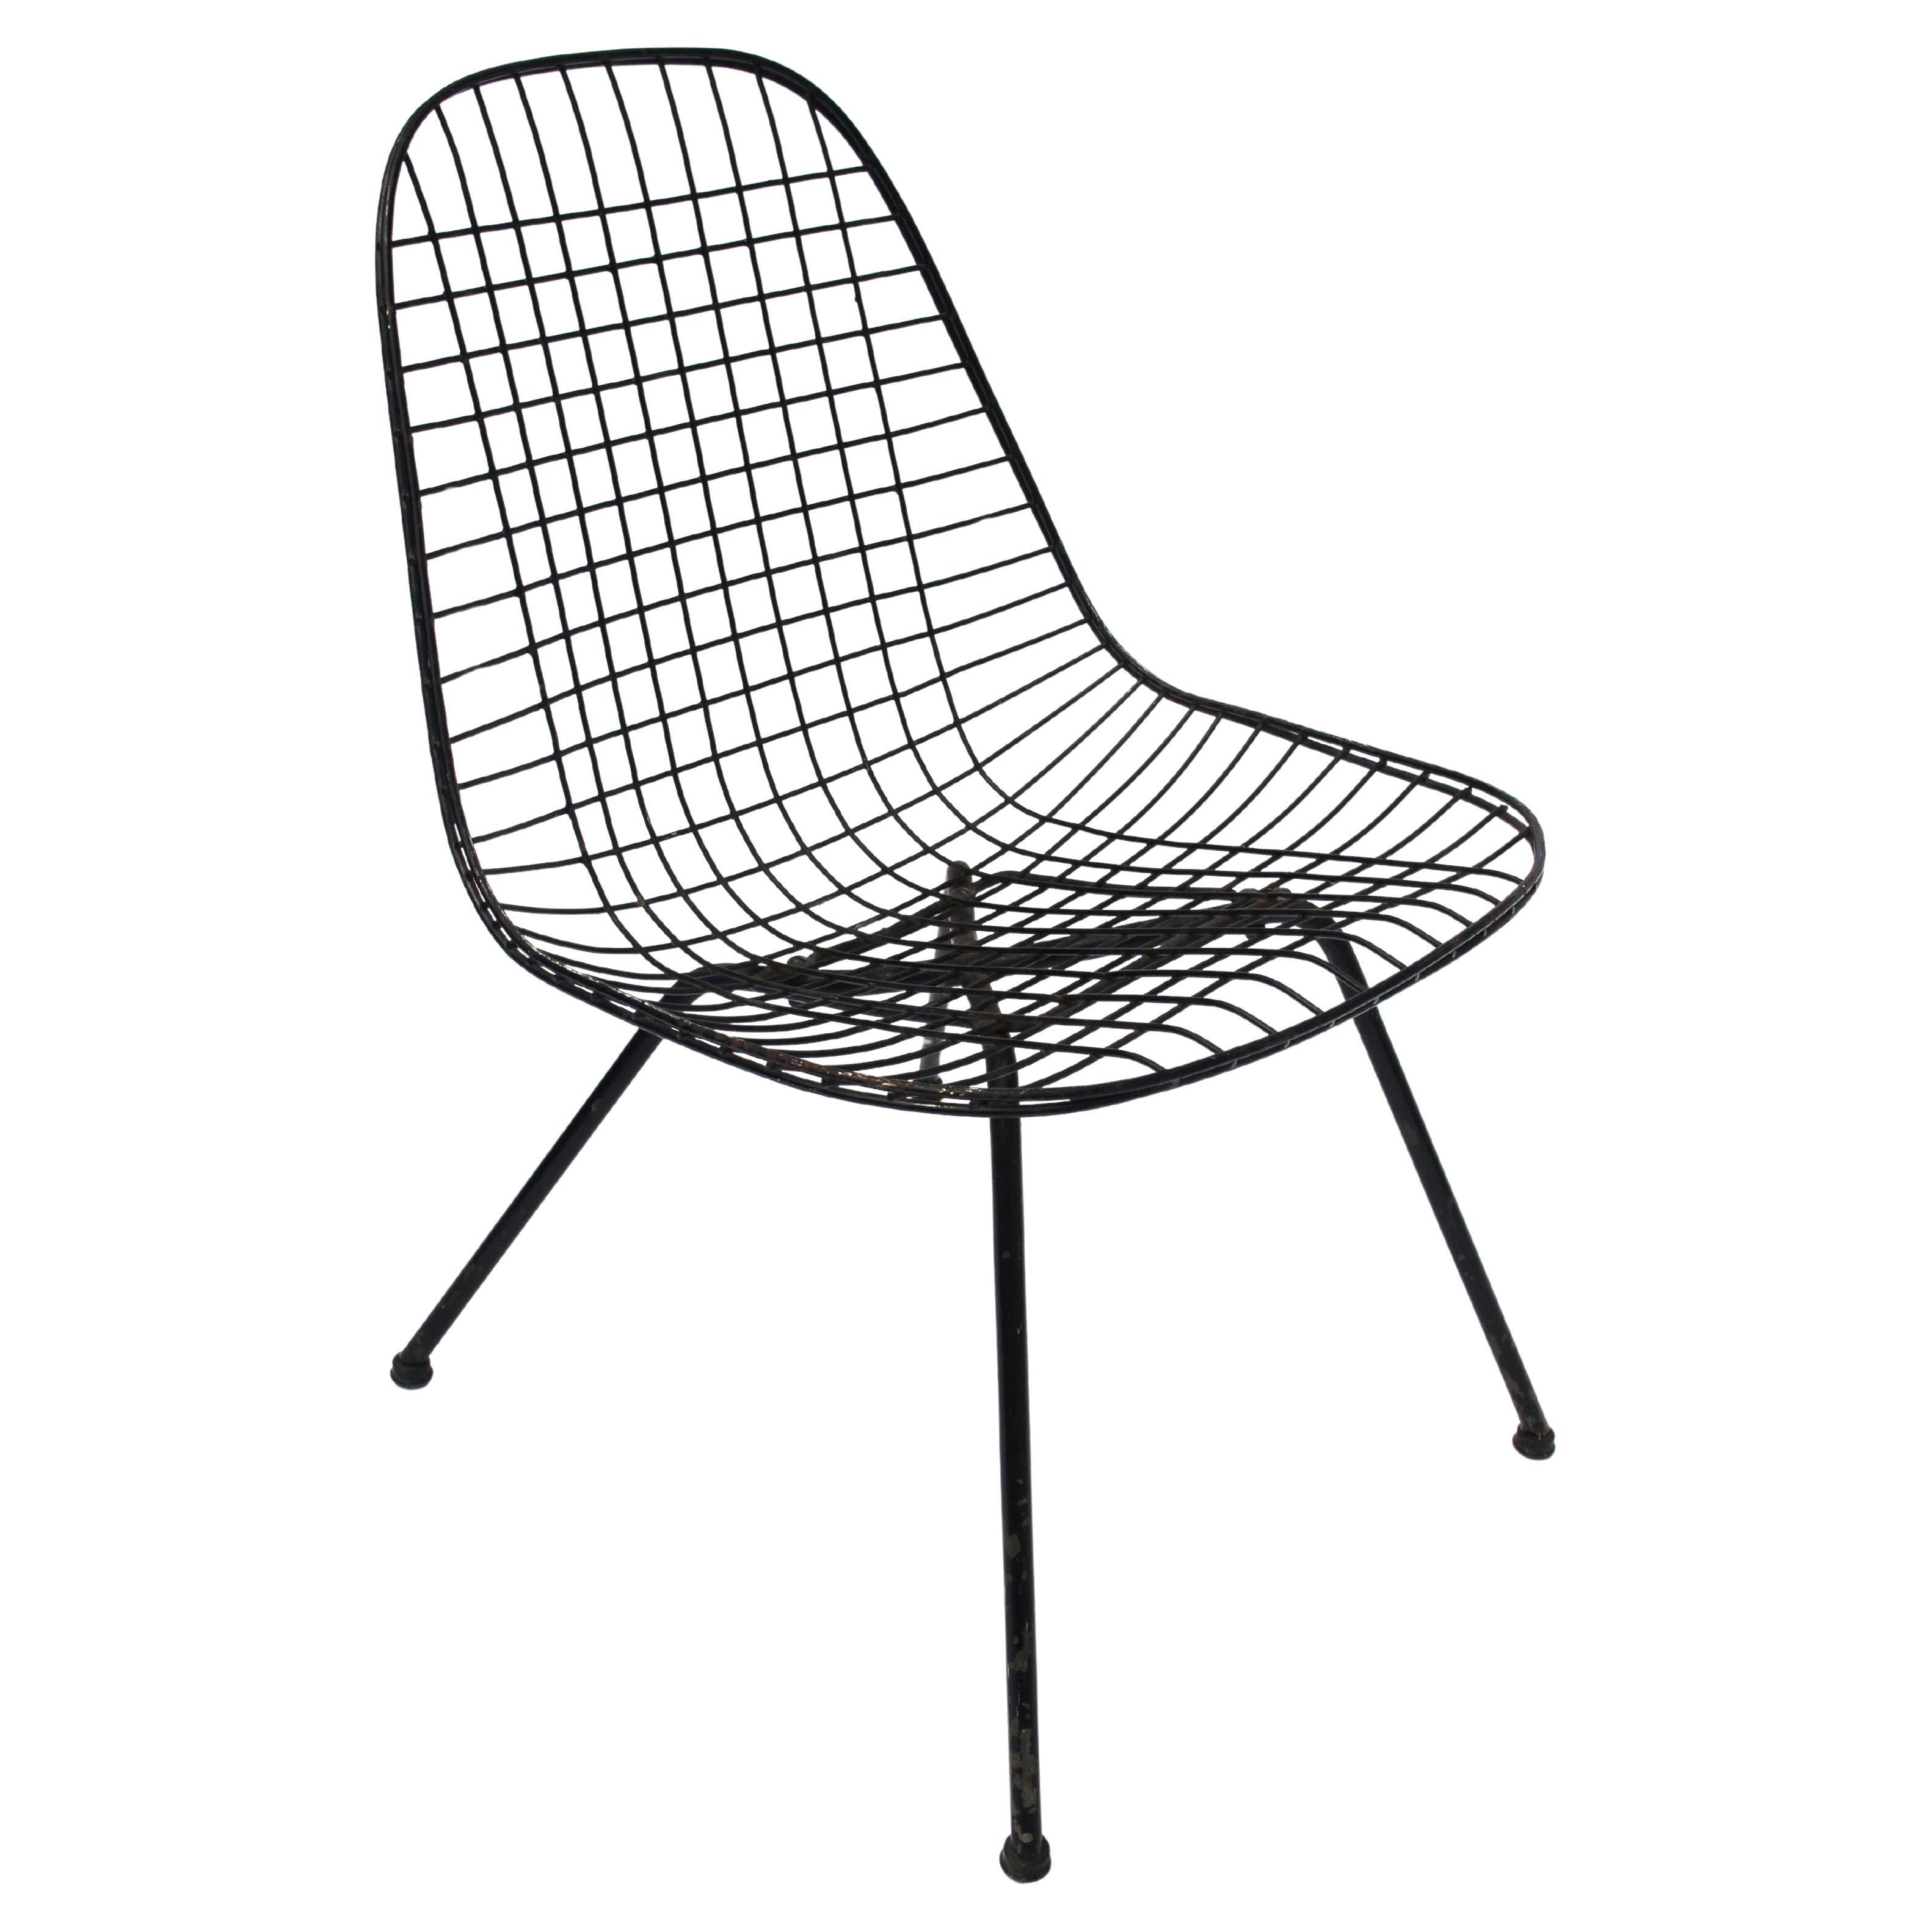 Are there fake Herman Miller chairs?